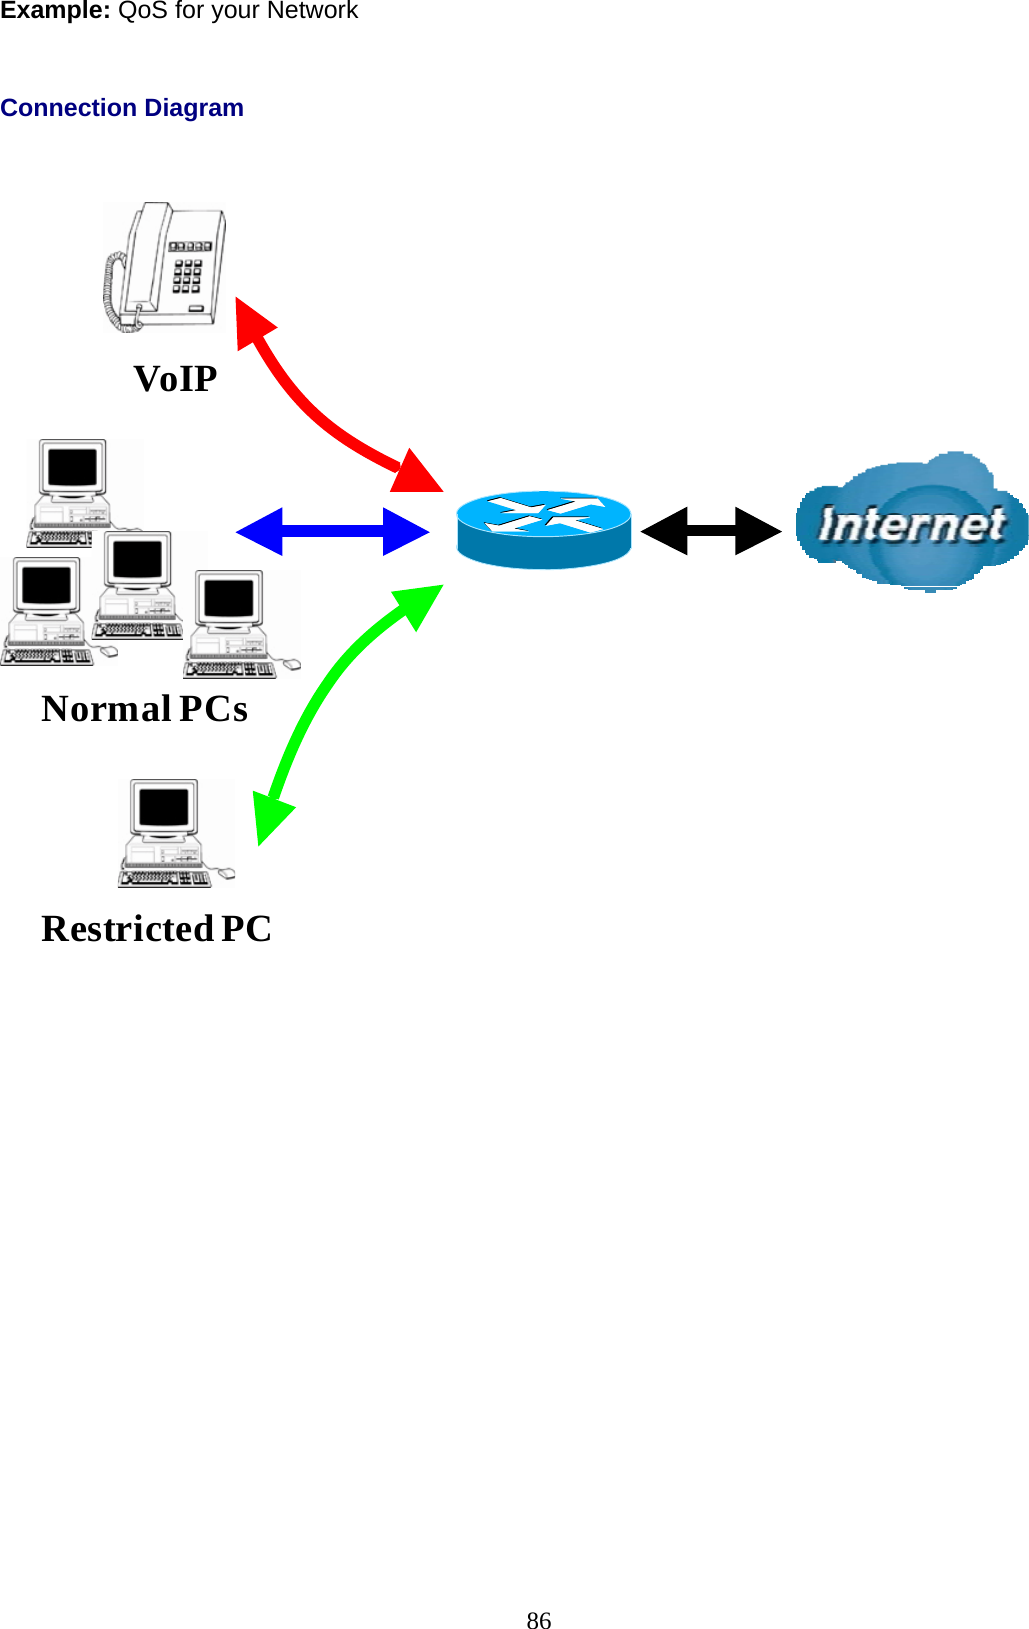 86  Example: QoS for your Network    Connection Diagram       VoIP         Normal PCs     Restricted PC 